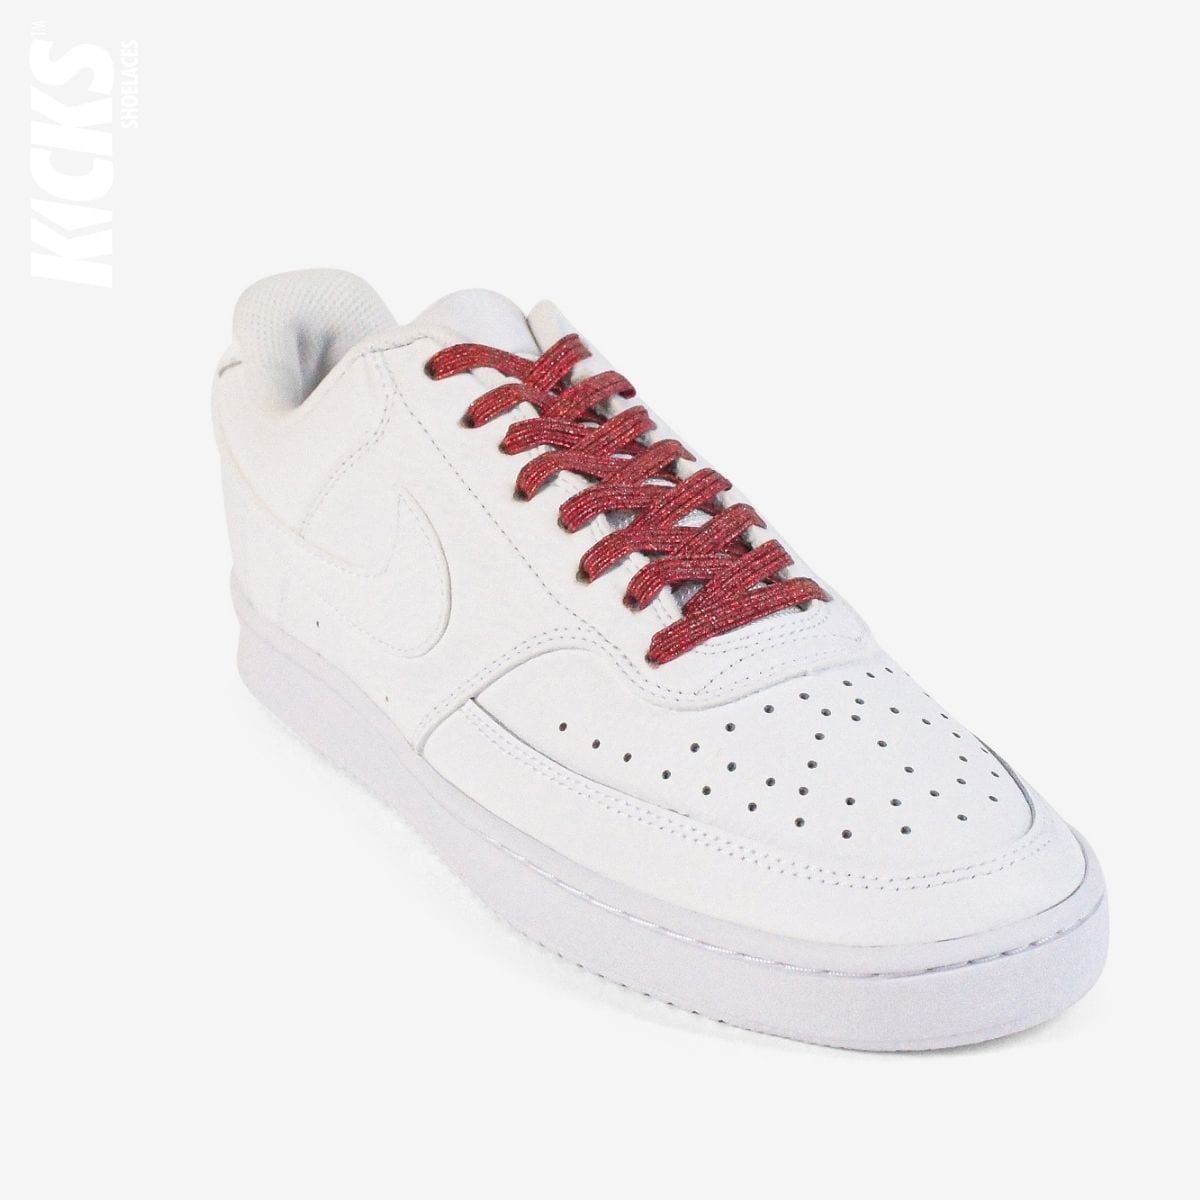 elastic-no-tie-shoelaces-with-red-laces-on-nike-white-sneakers